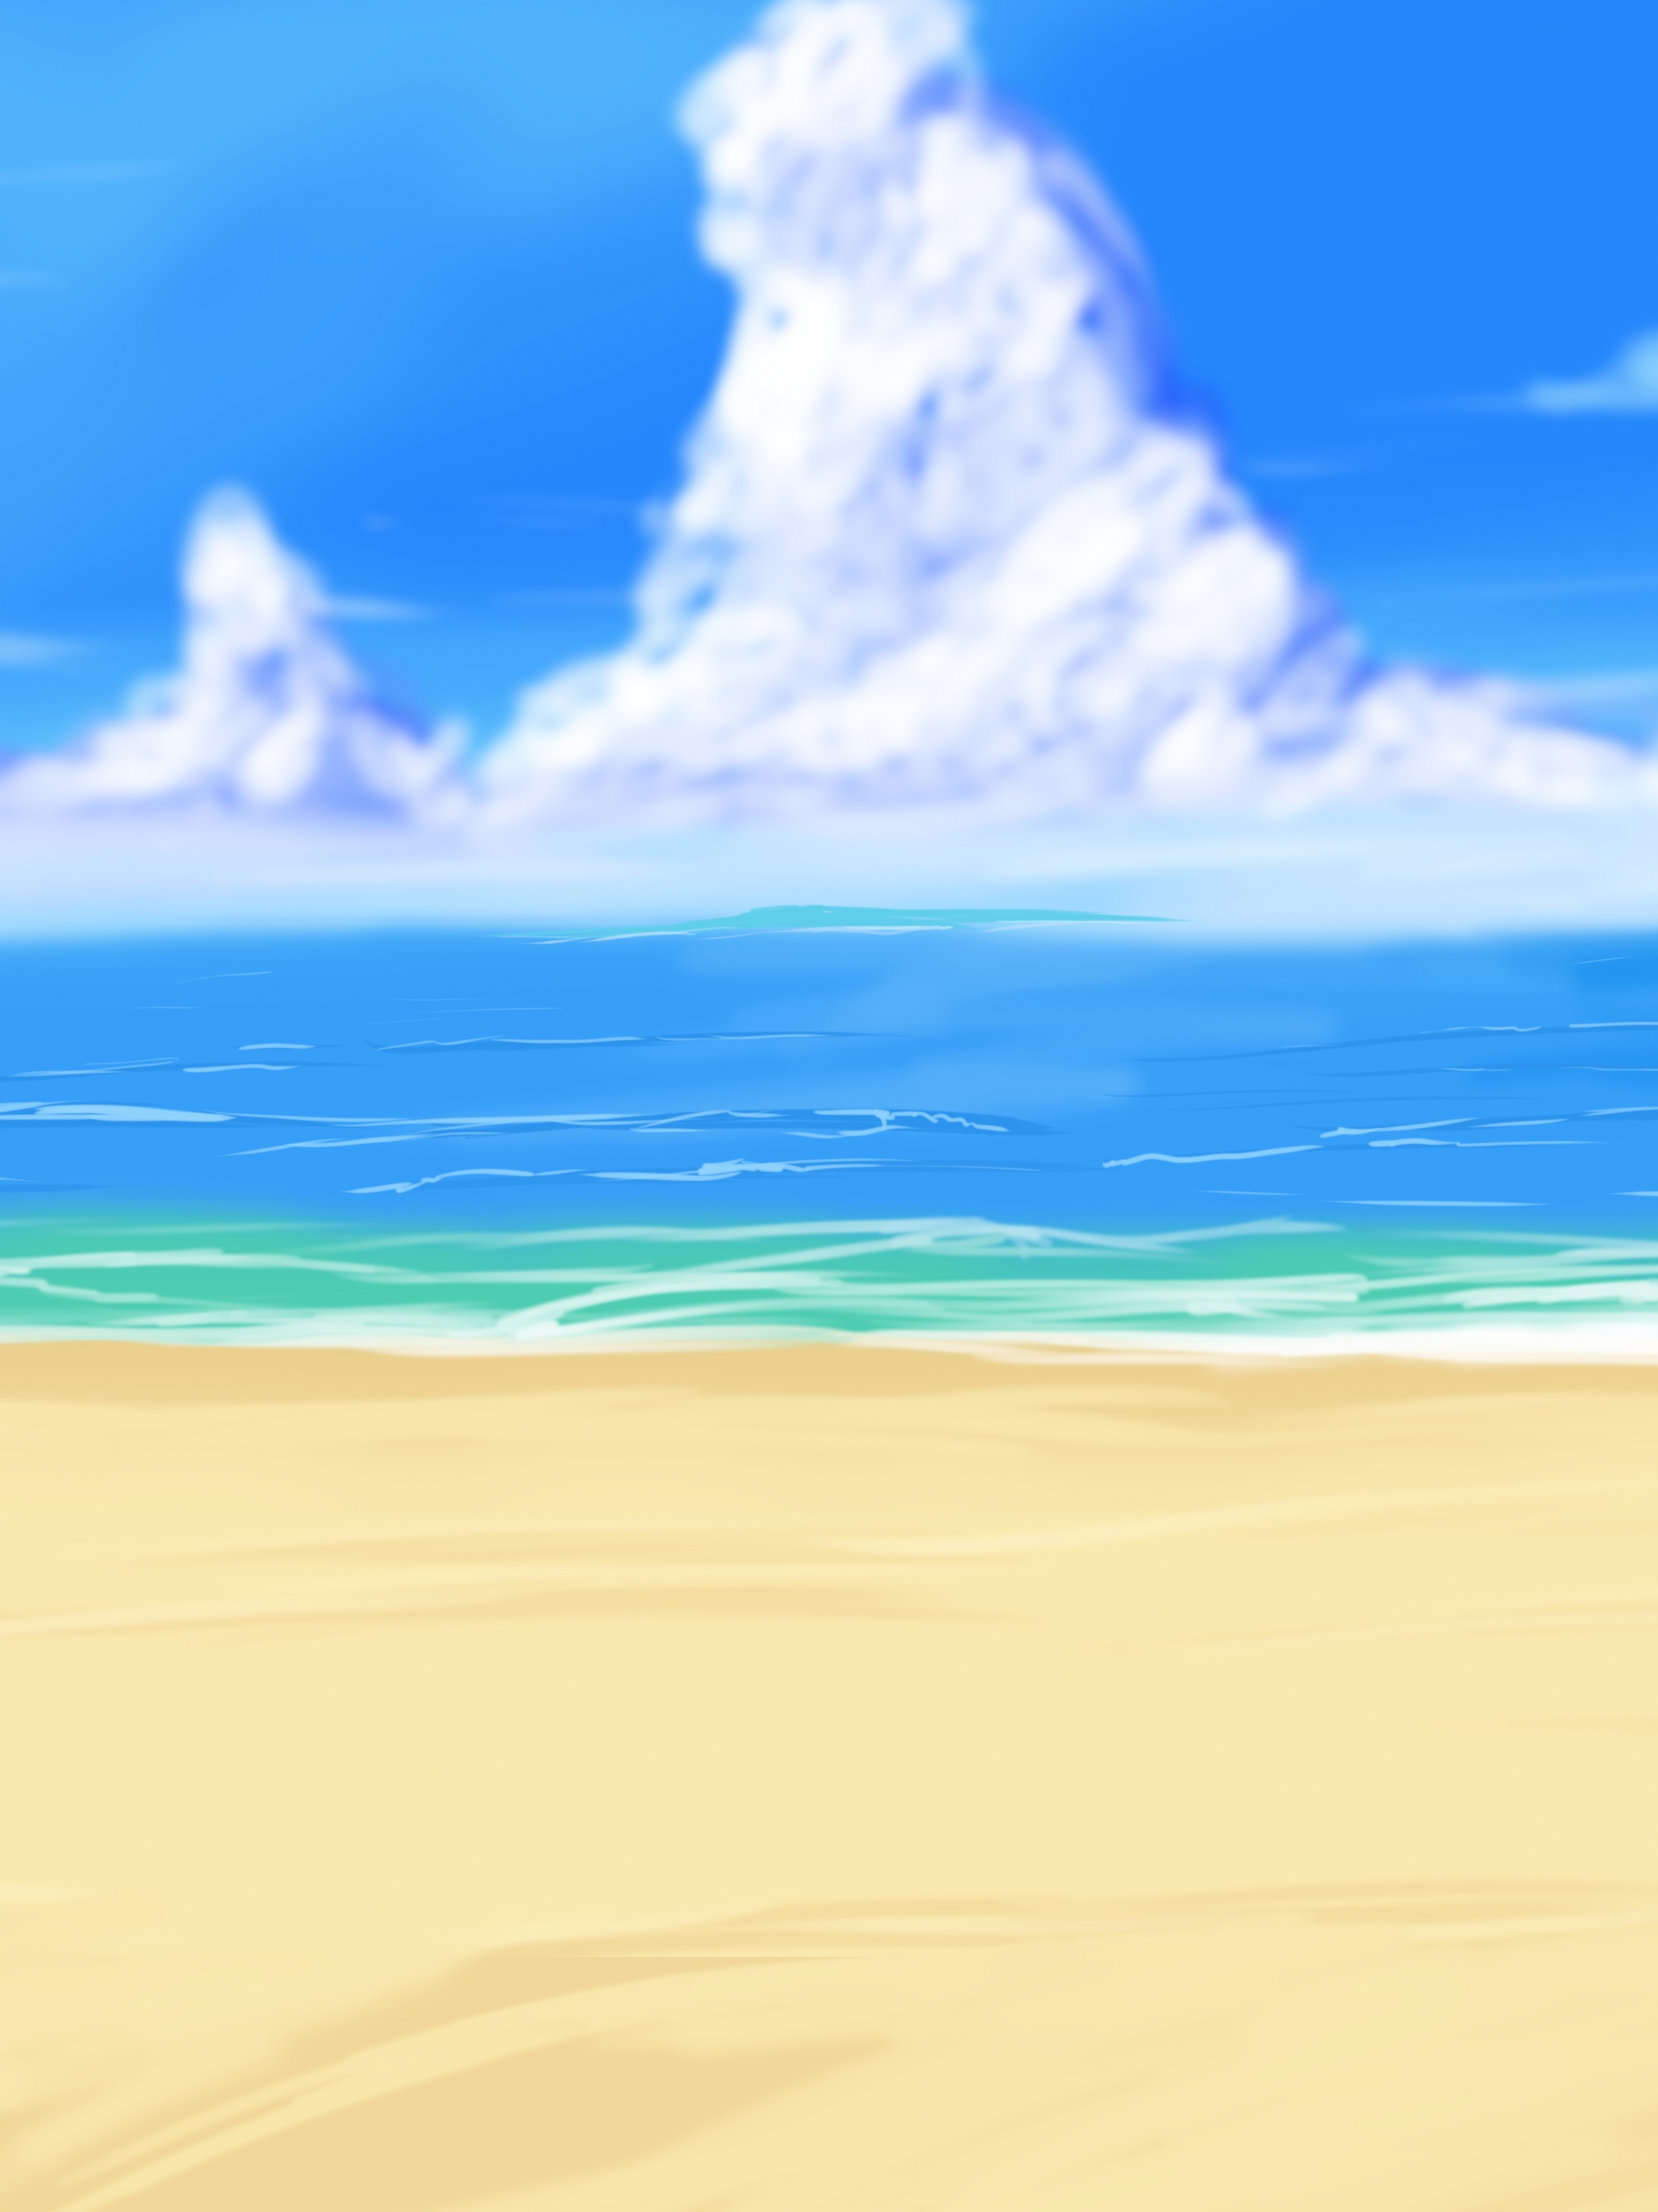 🔥 Free Download Free Download Big Anime Style Beach Background By Wbd